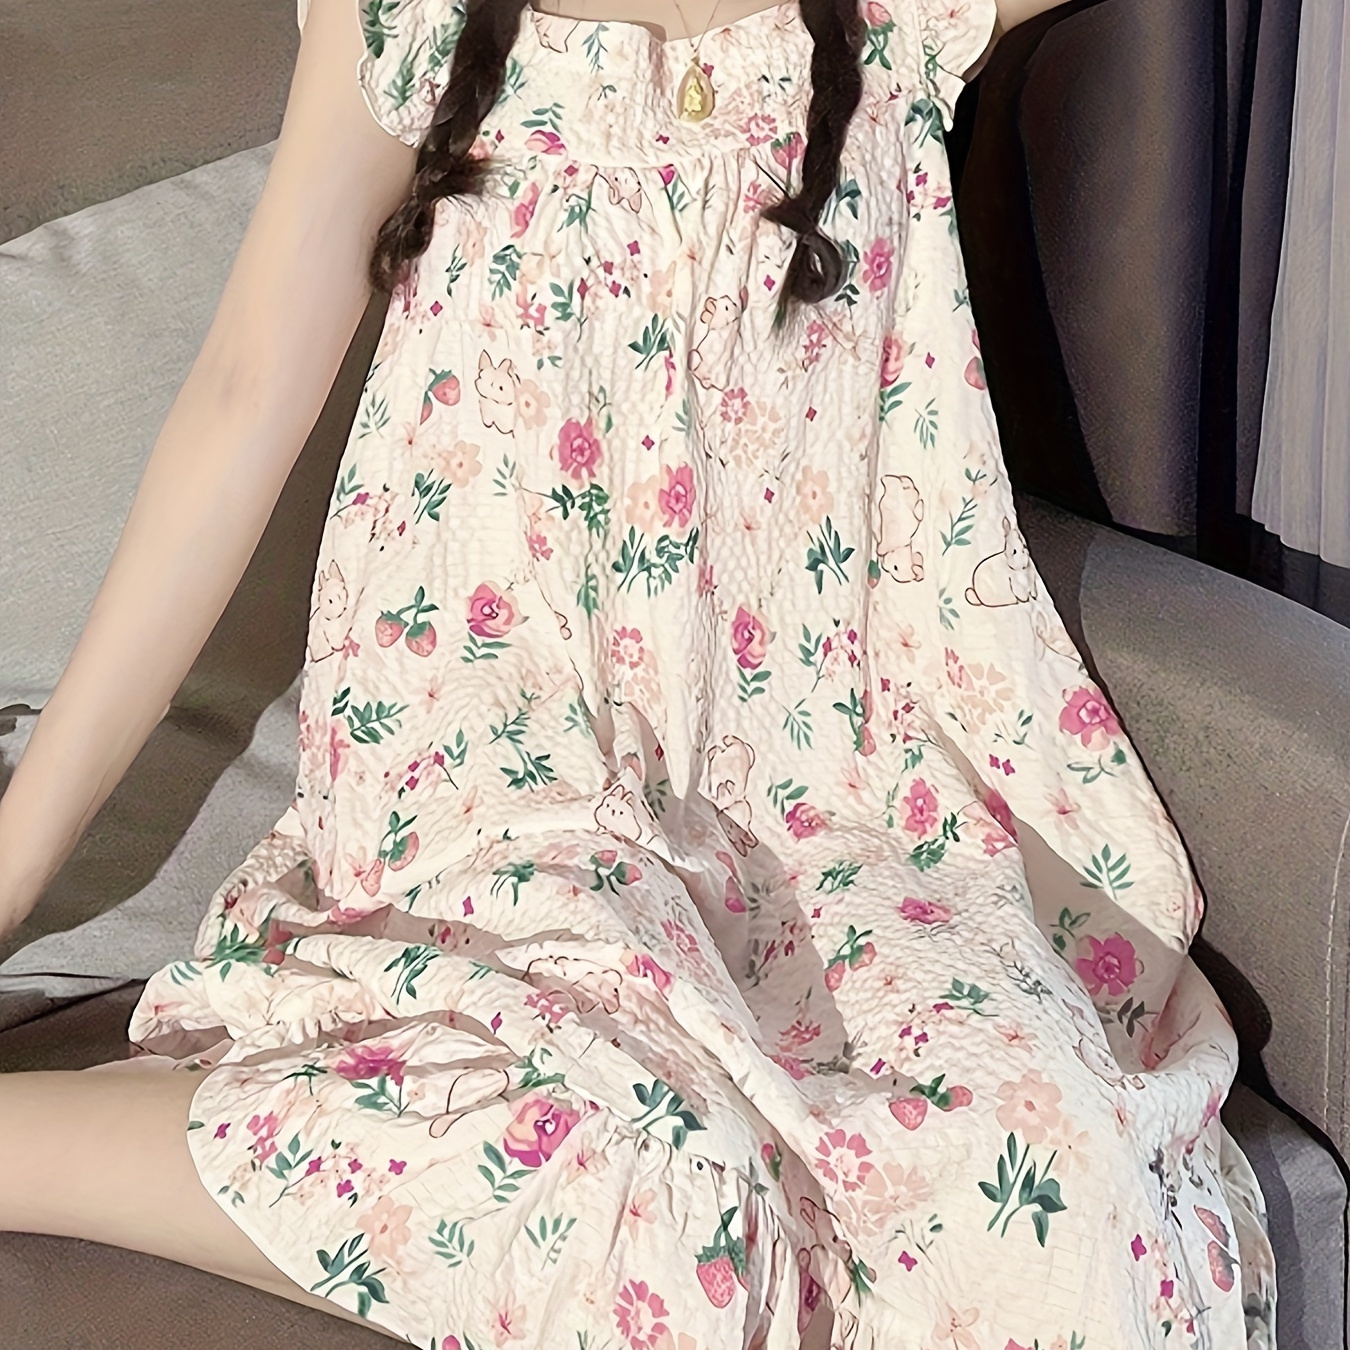 

Adorable nightdress with rabbit and floral print, featuring charming ruffle sleeves, a square neckline, and a frilly hem. Perfect for women's sleepwear.